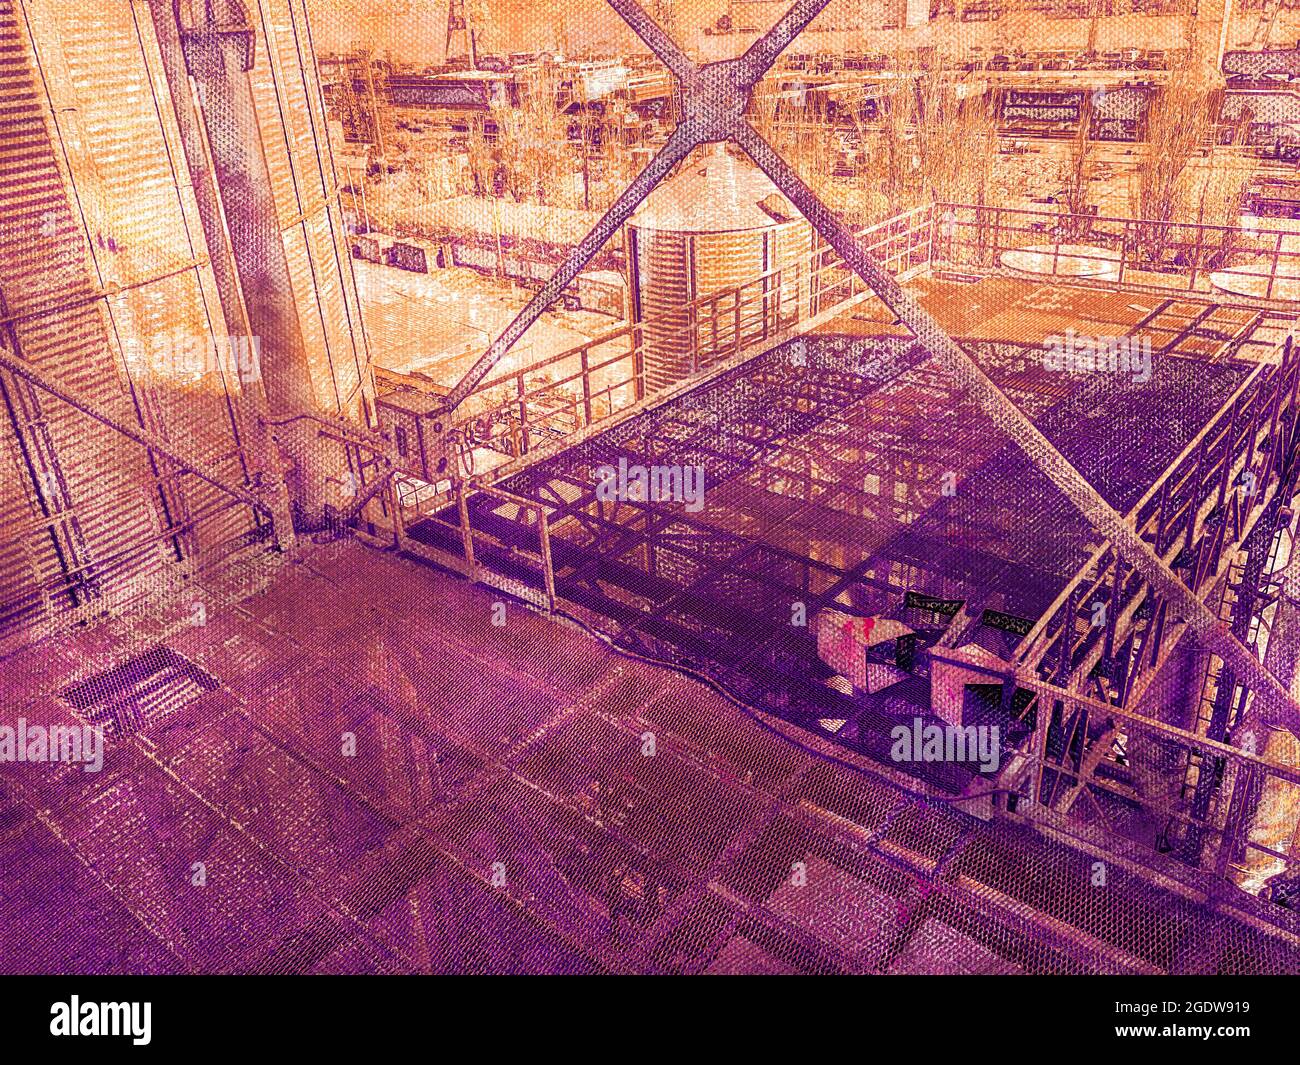 Modern grain terminal in the port. Industrial complex for loading, unloading, storage of grain cargo. Silos, conveyor belts, ventilation systems to cl Stock Photo